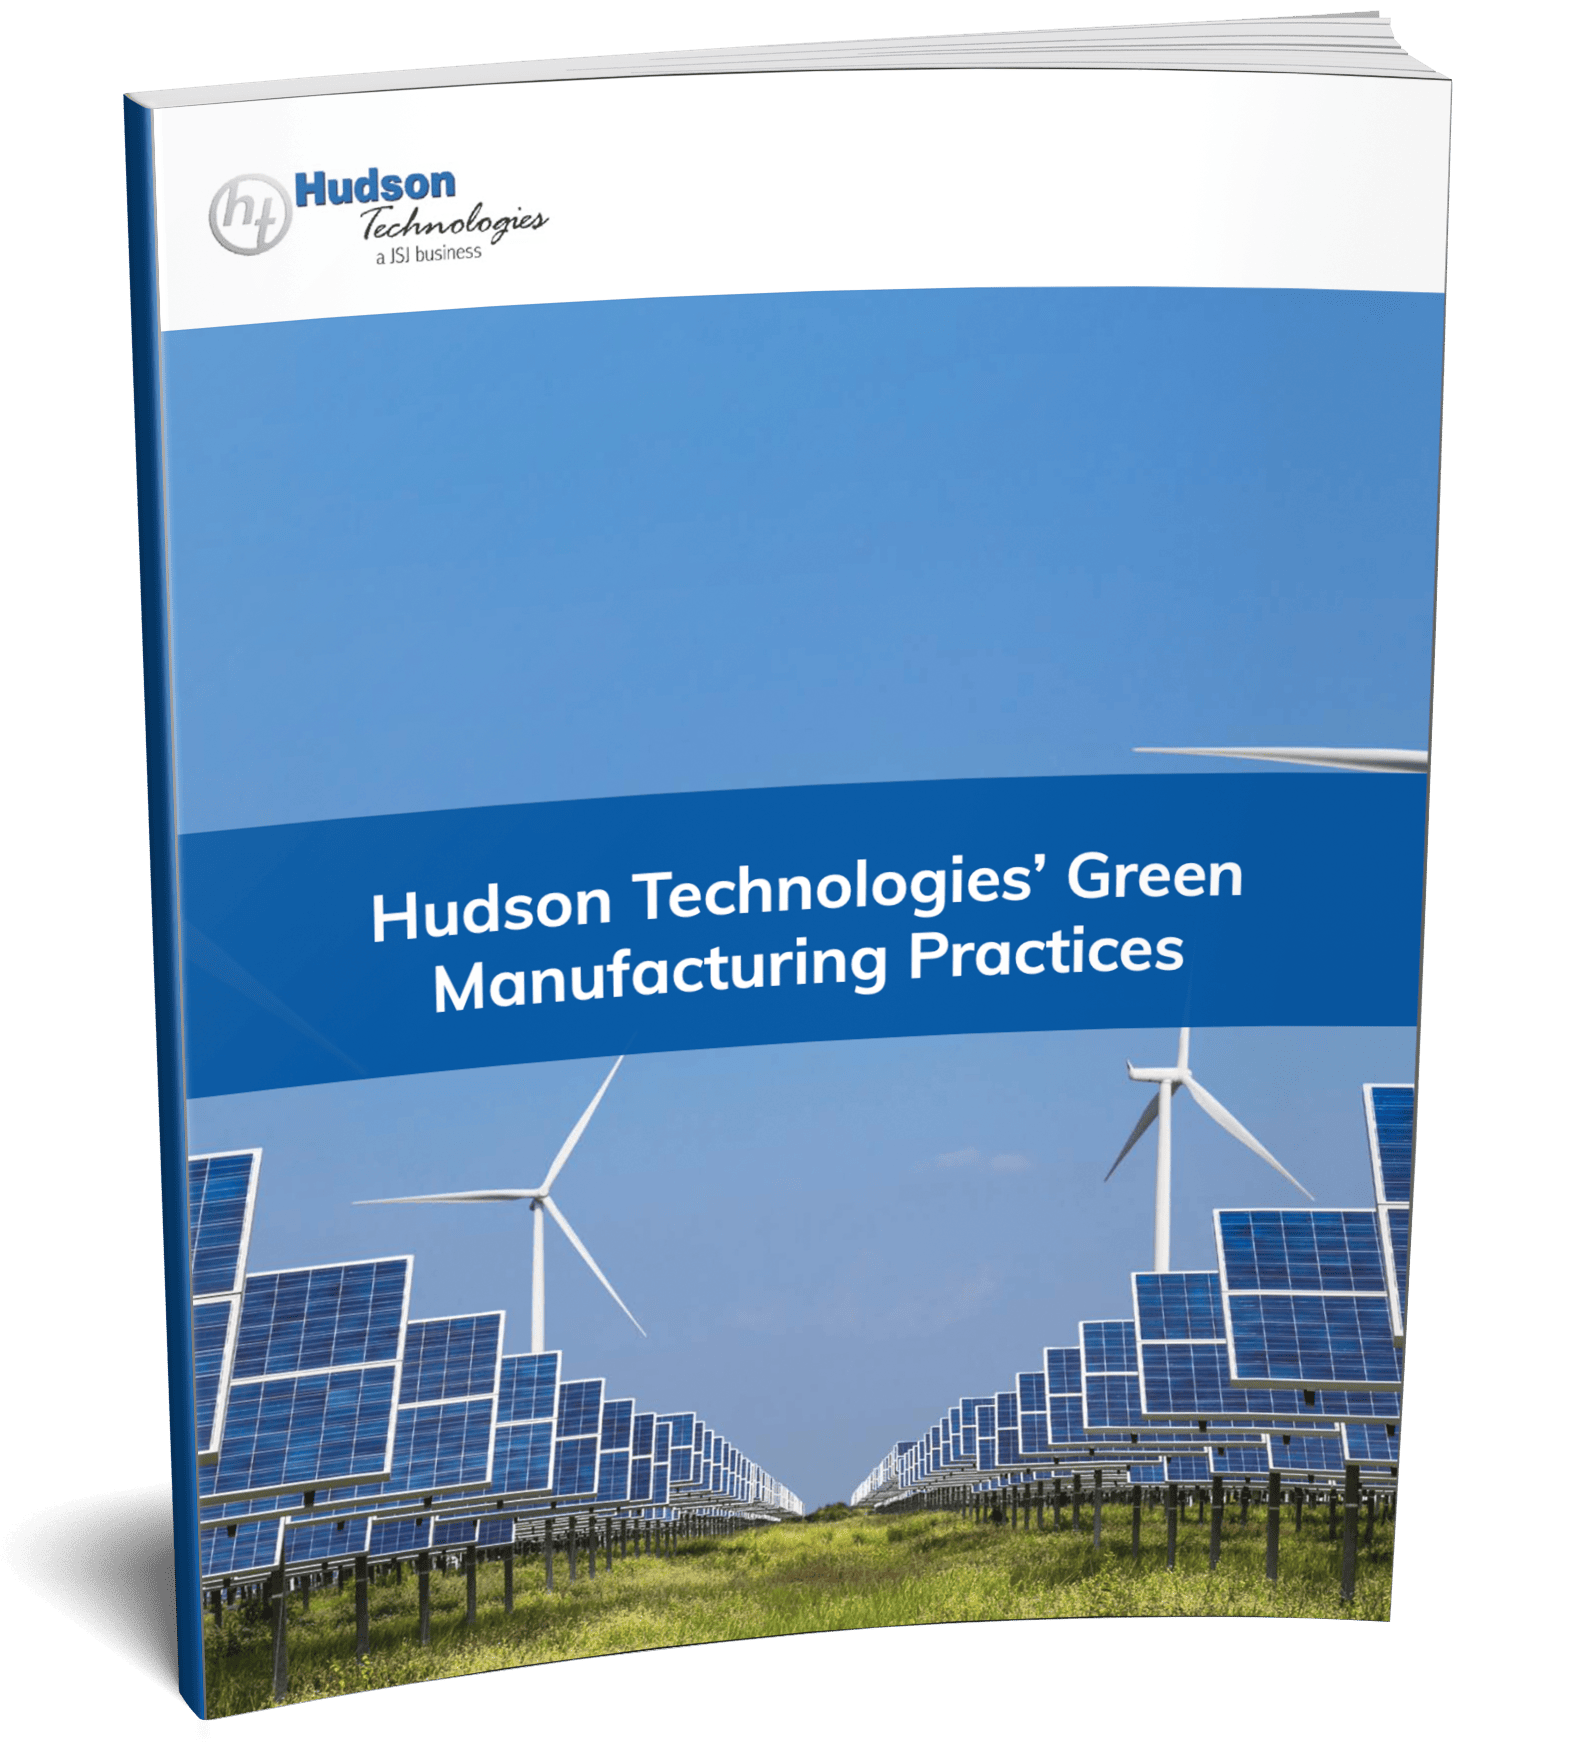 Our Journey to Go Green